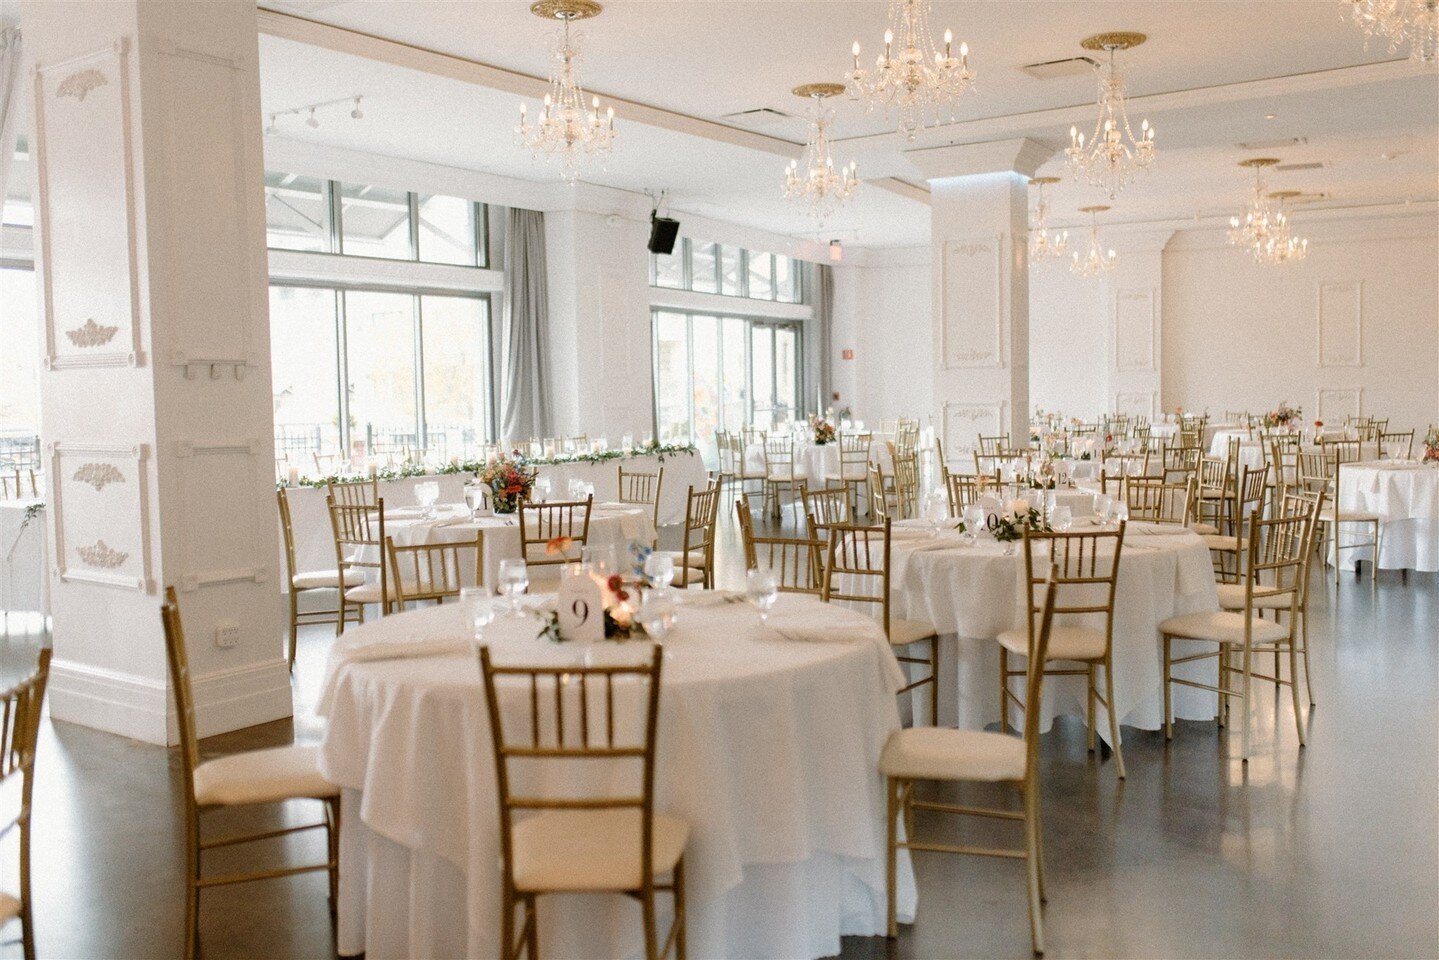 Dine with up to 350 of your family and friends in our bright space, flooded with natural light✨⁠
⁠
Discover the possibilities of your next event at our venue when you schedule a tour with one of our Expert Event Managers today!✨⁠
⁠
Photography | @kar